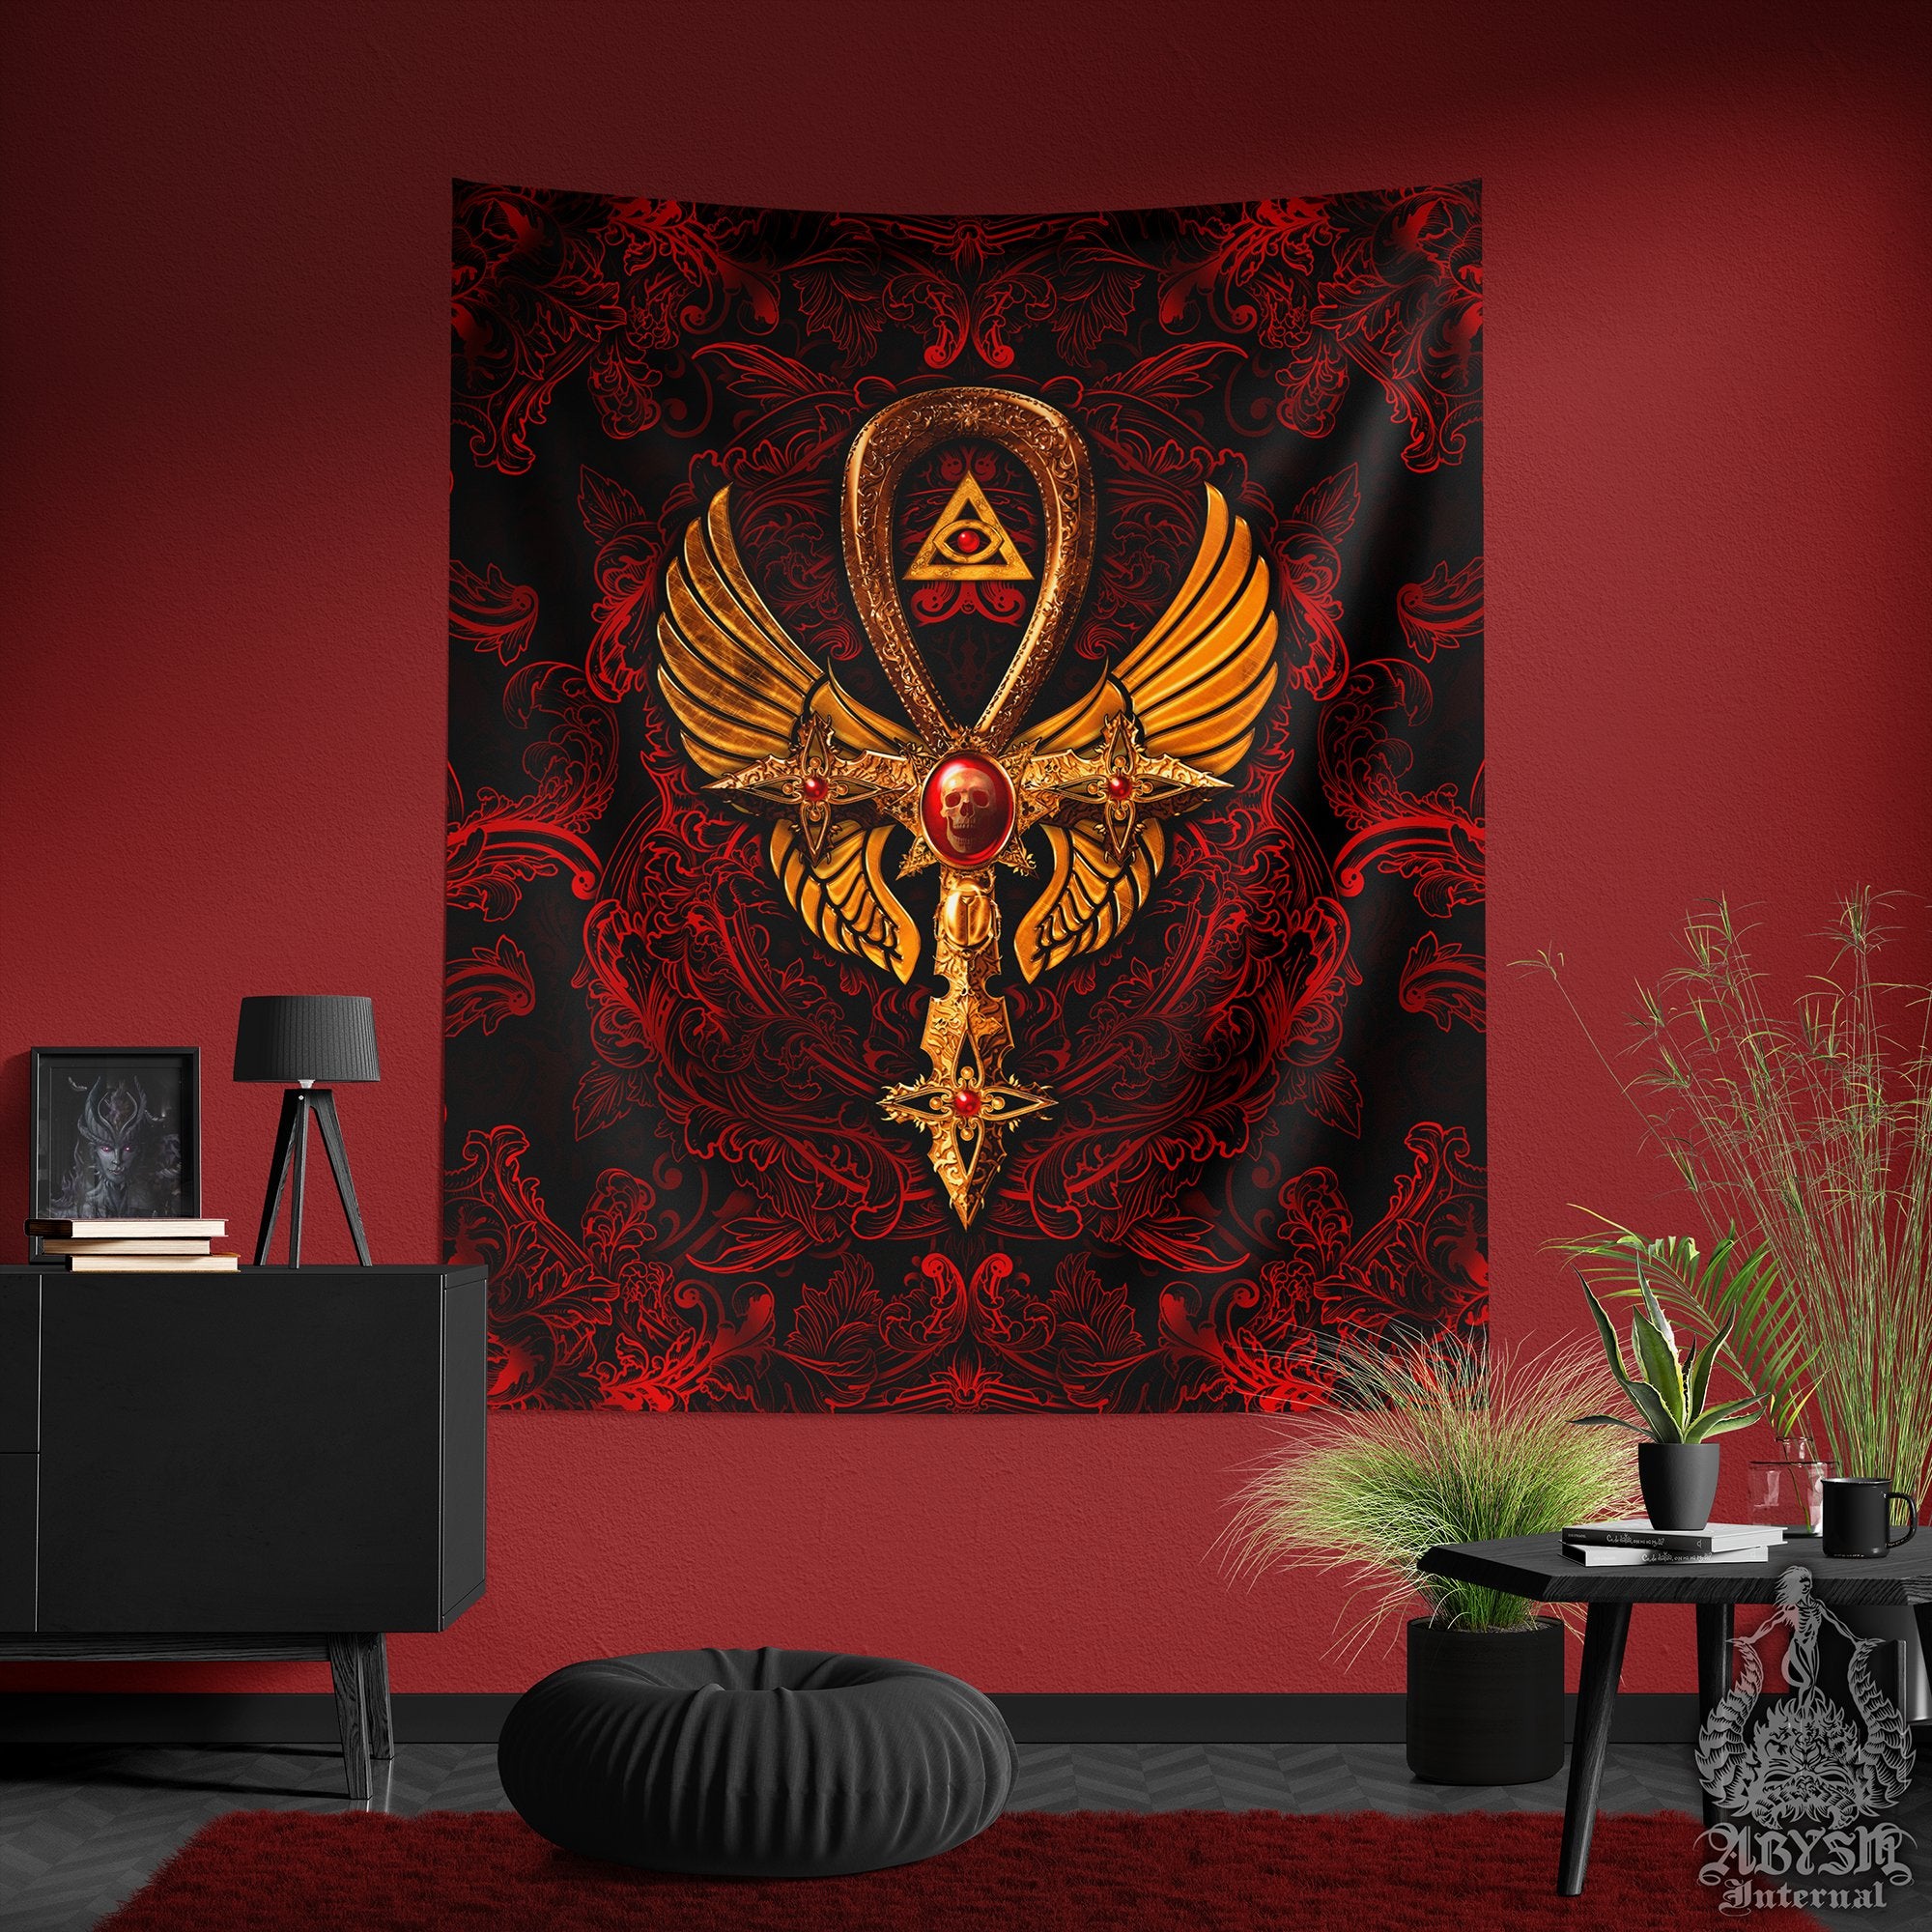 Bloody Gothic Tapestry, Goth Cross Wall Hanging, Occult Home Decor, Vertical Art Print - Dark Ankh, Black, Red, Gold, 3 Colors - Abysm Internal